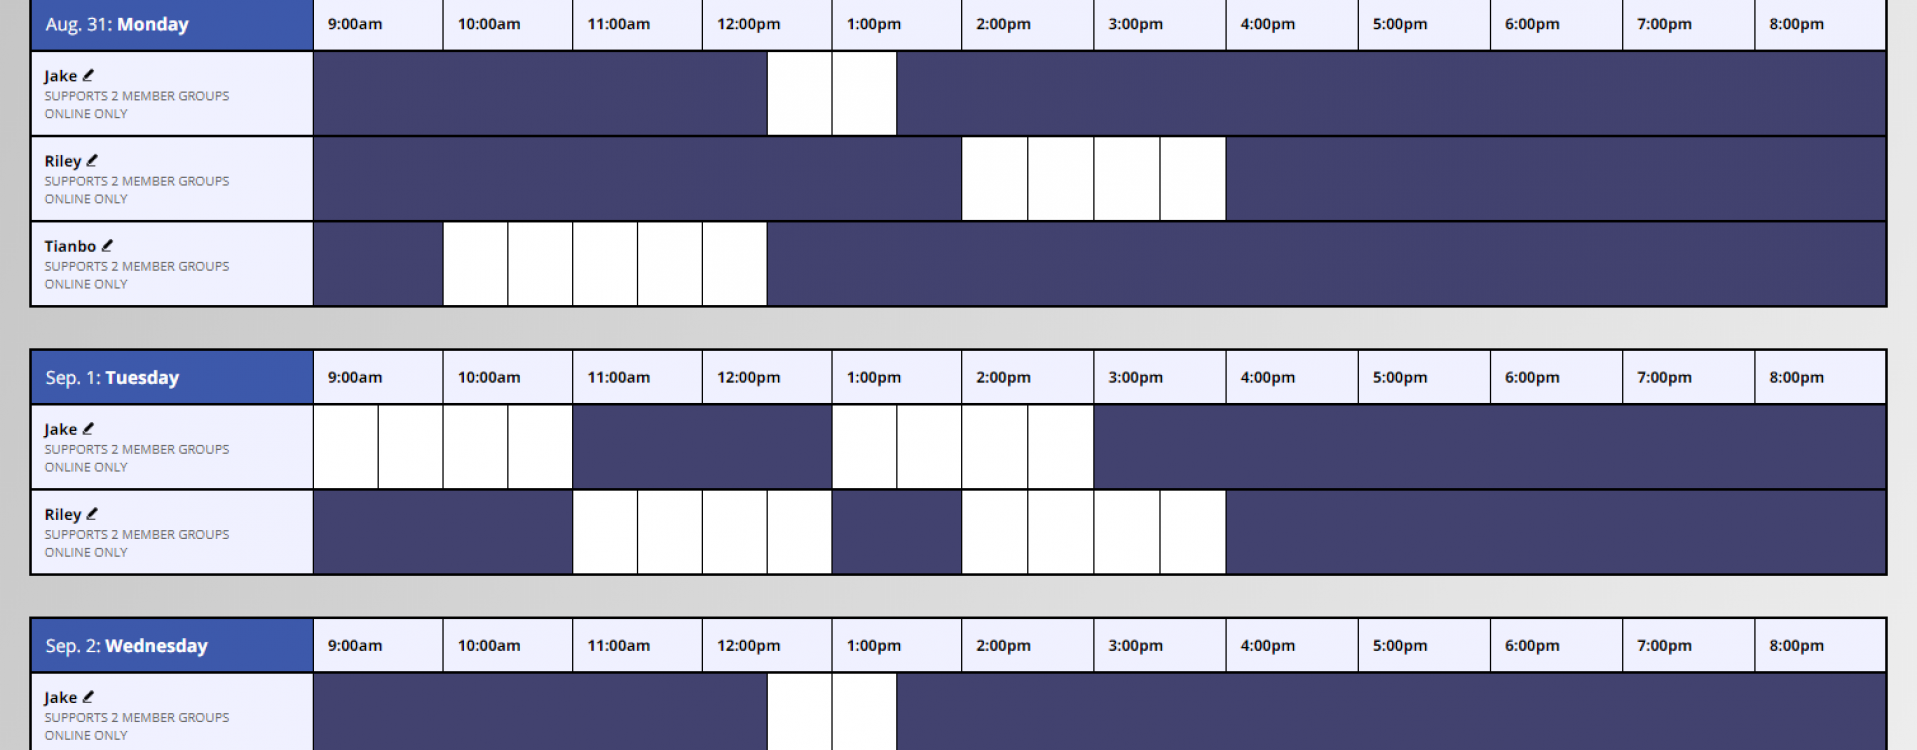 An image of the math schedule as displayed in WCOnline.